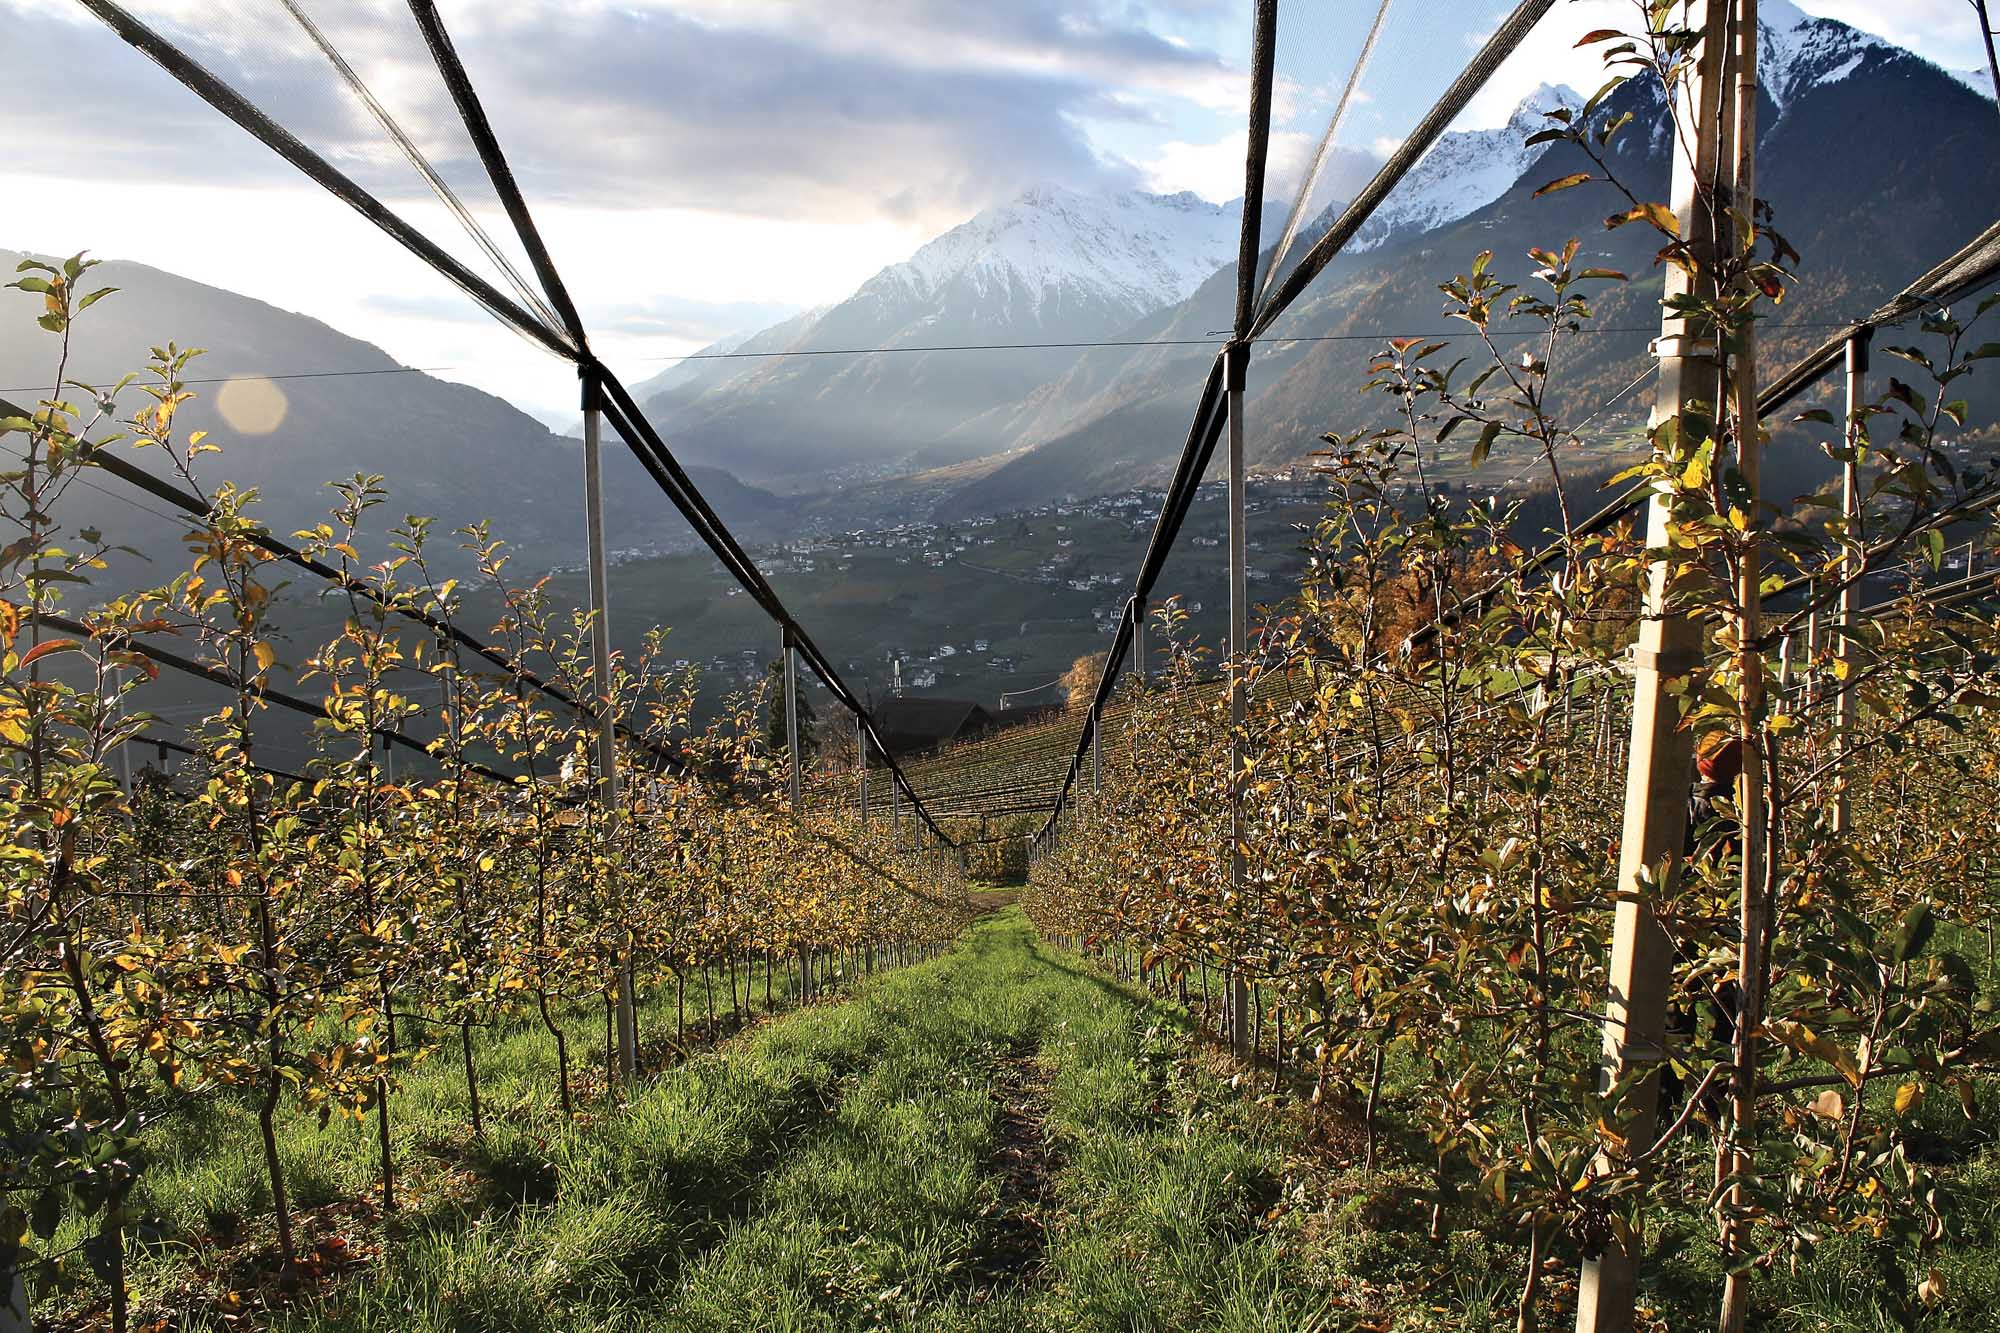 Nestled along the Alpine range, Italy’s northern province of South Tyrol (Sudtirol) has about 45,000 acres of apples, but most are on farms of less than 12 acres. Growers here collaborate in mighty cooperatives to produce about 58 million bushels each year. The 25-acre farm owned by grower Stefan Klotzner offers striking views.(Richard Lehnert/Good Fruit Grower)